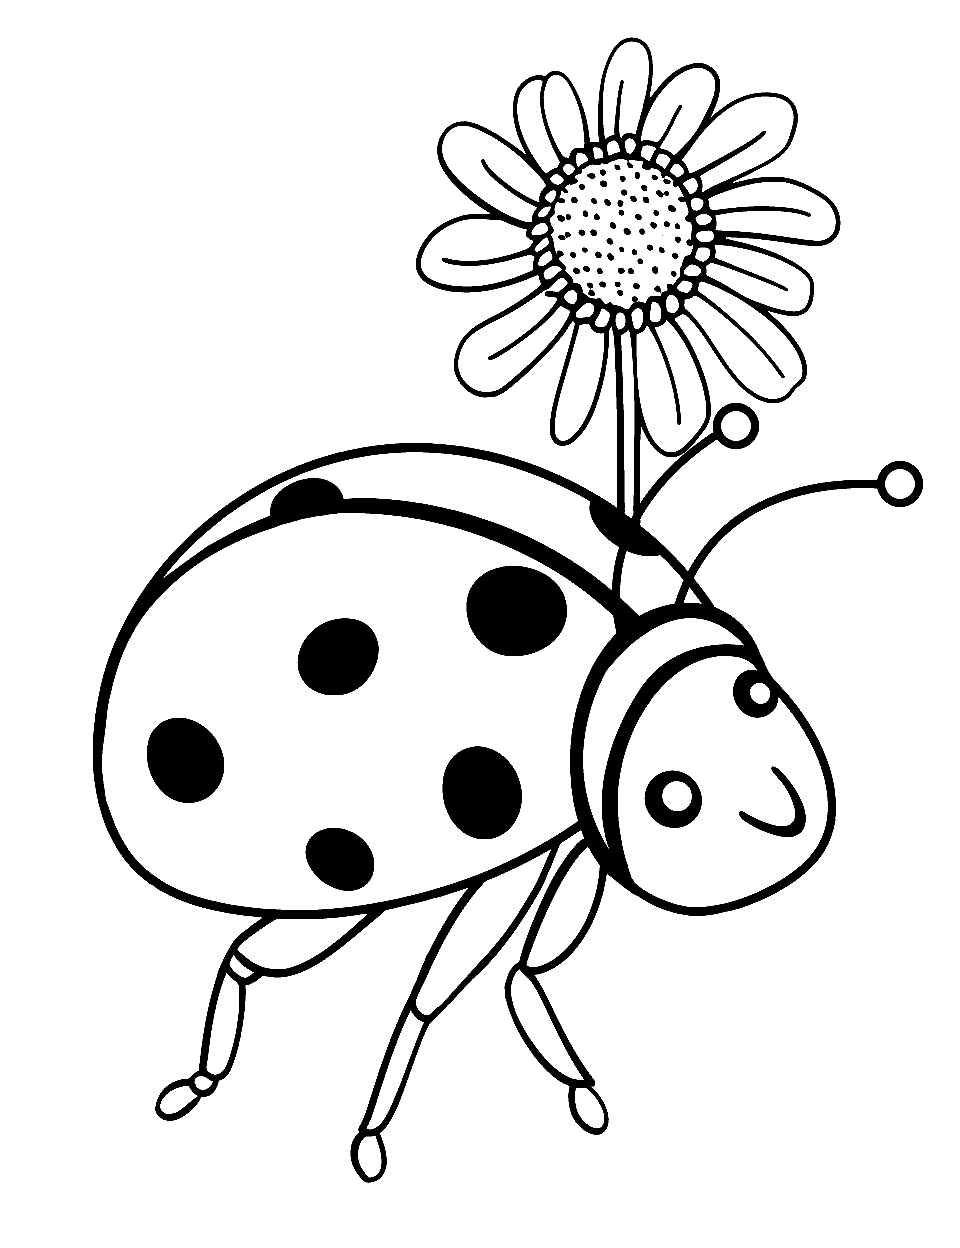 Curious Ladybird Beetle Coloring Page - A ladybird exploring a single daisy flower.